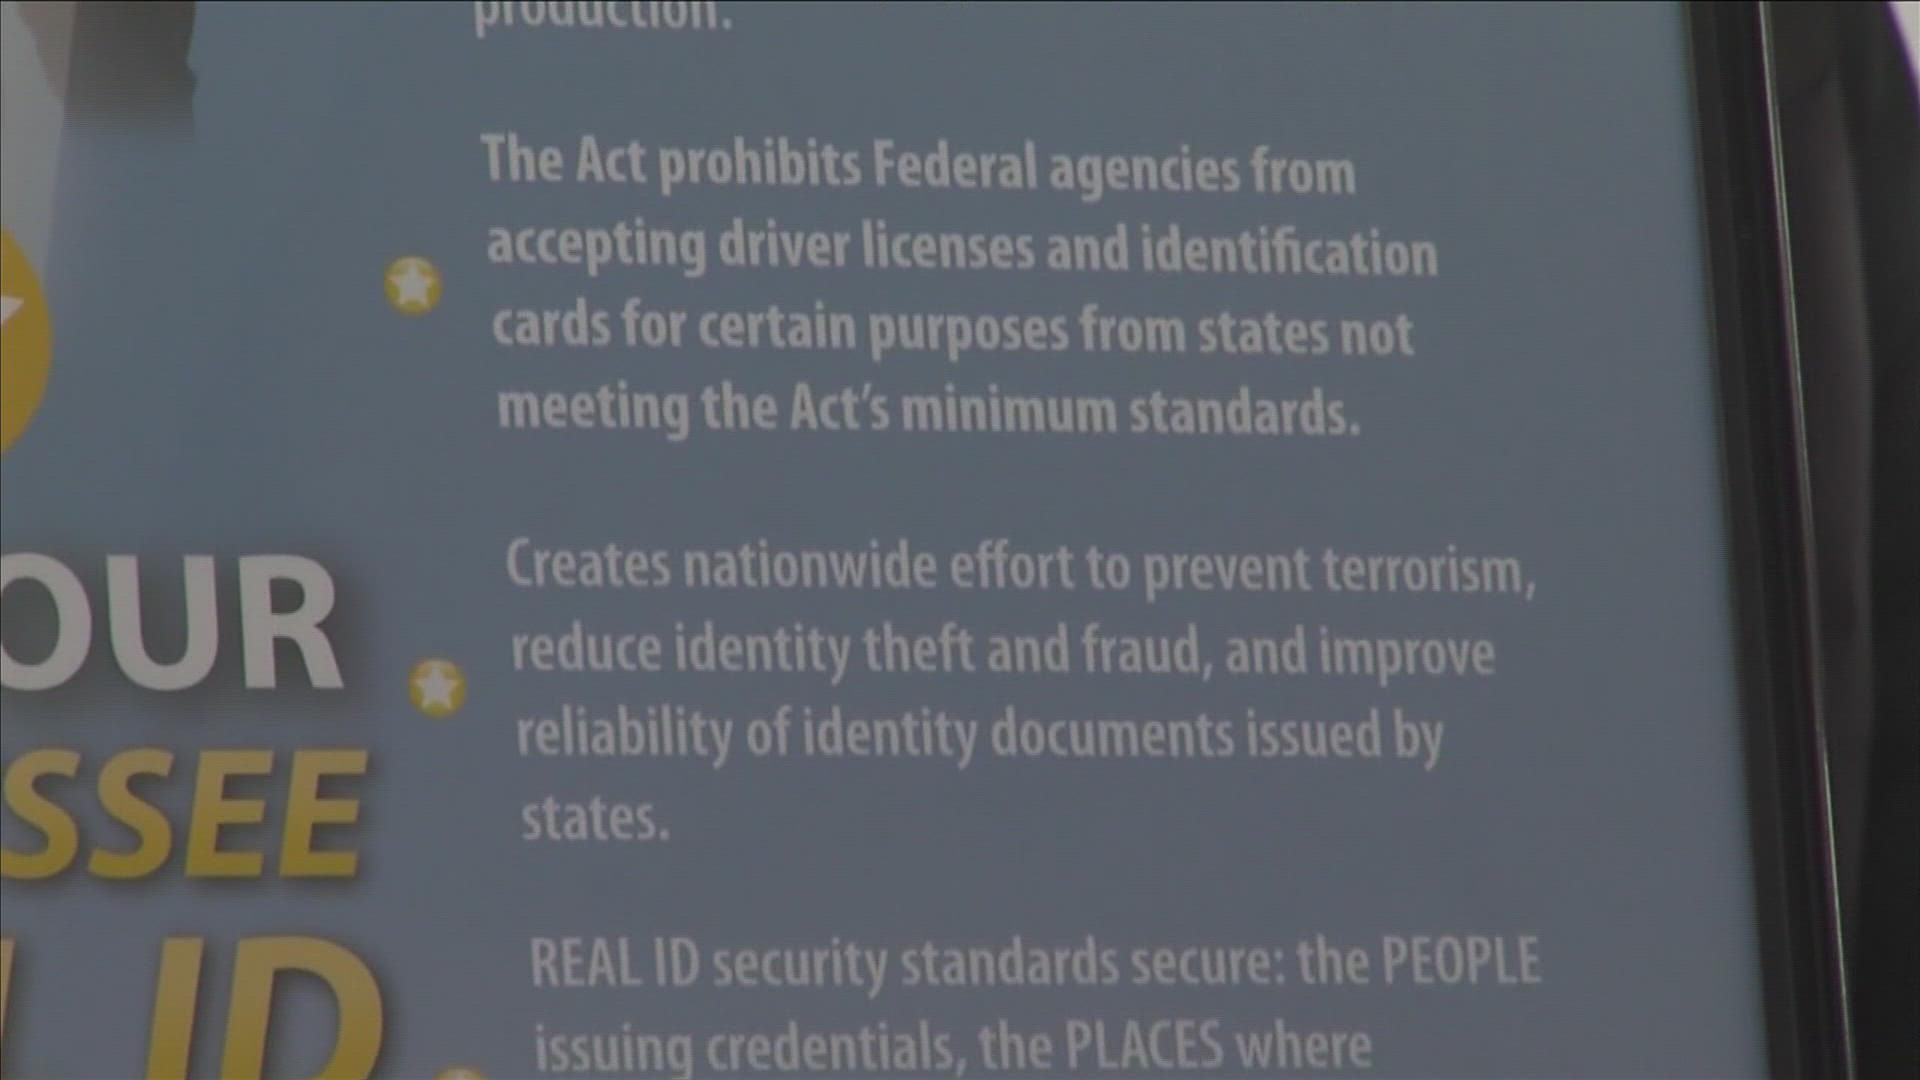 REAL ID enforcement is expected to start on May 7, 2025, after being postponed several times.